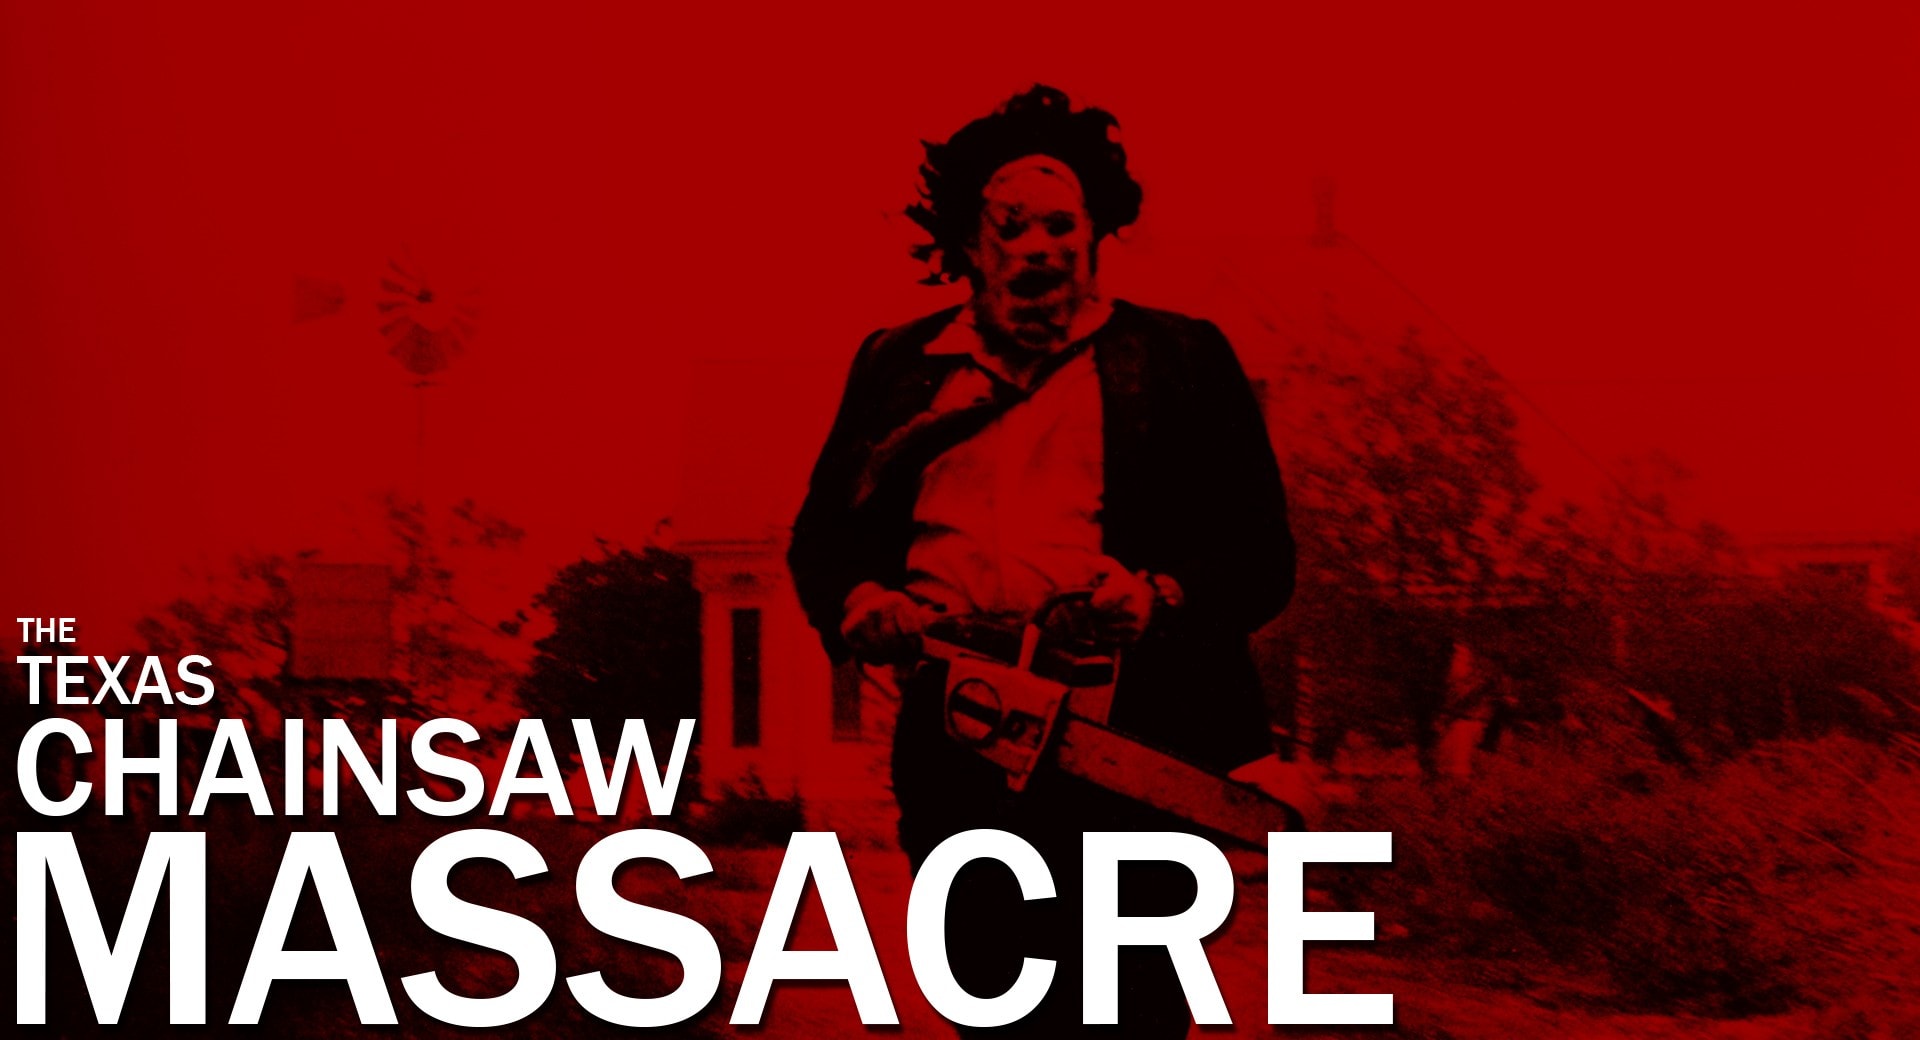 The Texas Chain Saw Massacre 4K 1974 REMASTERED big poster